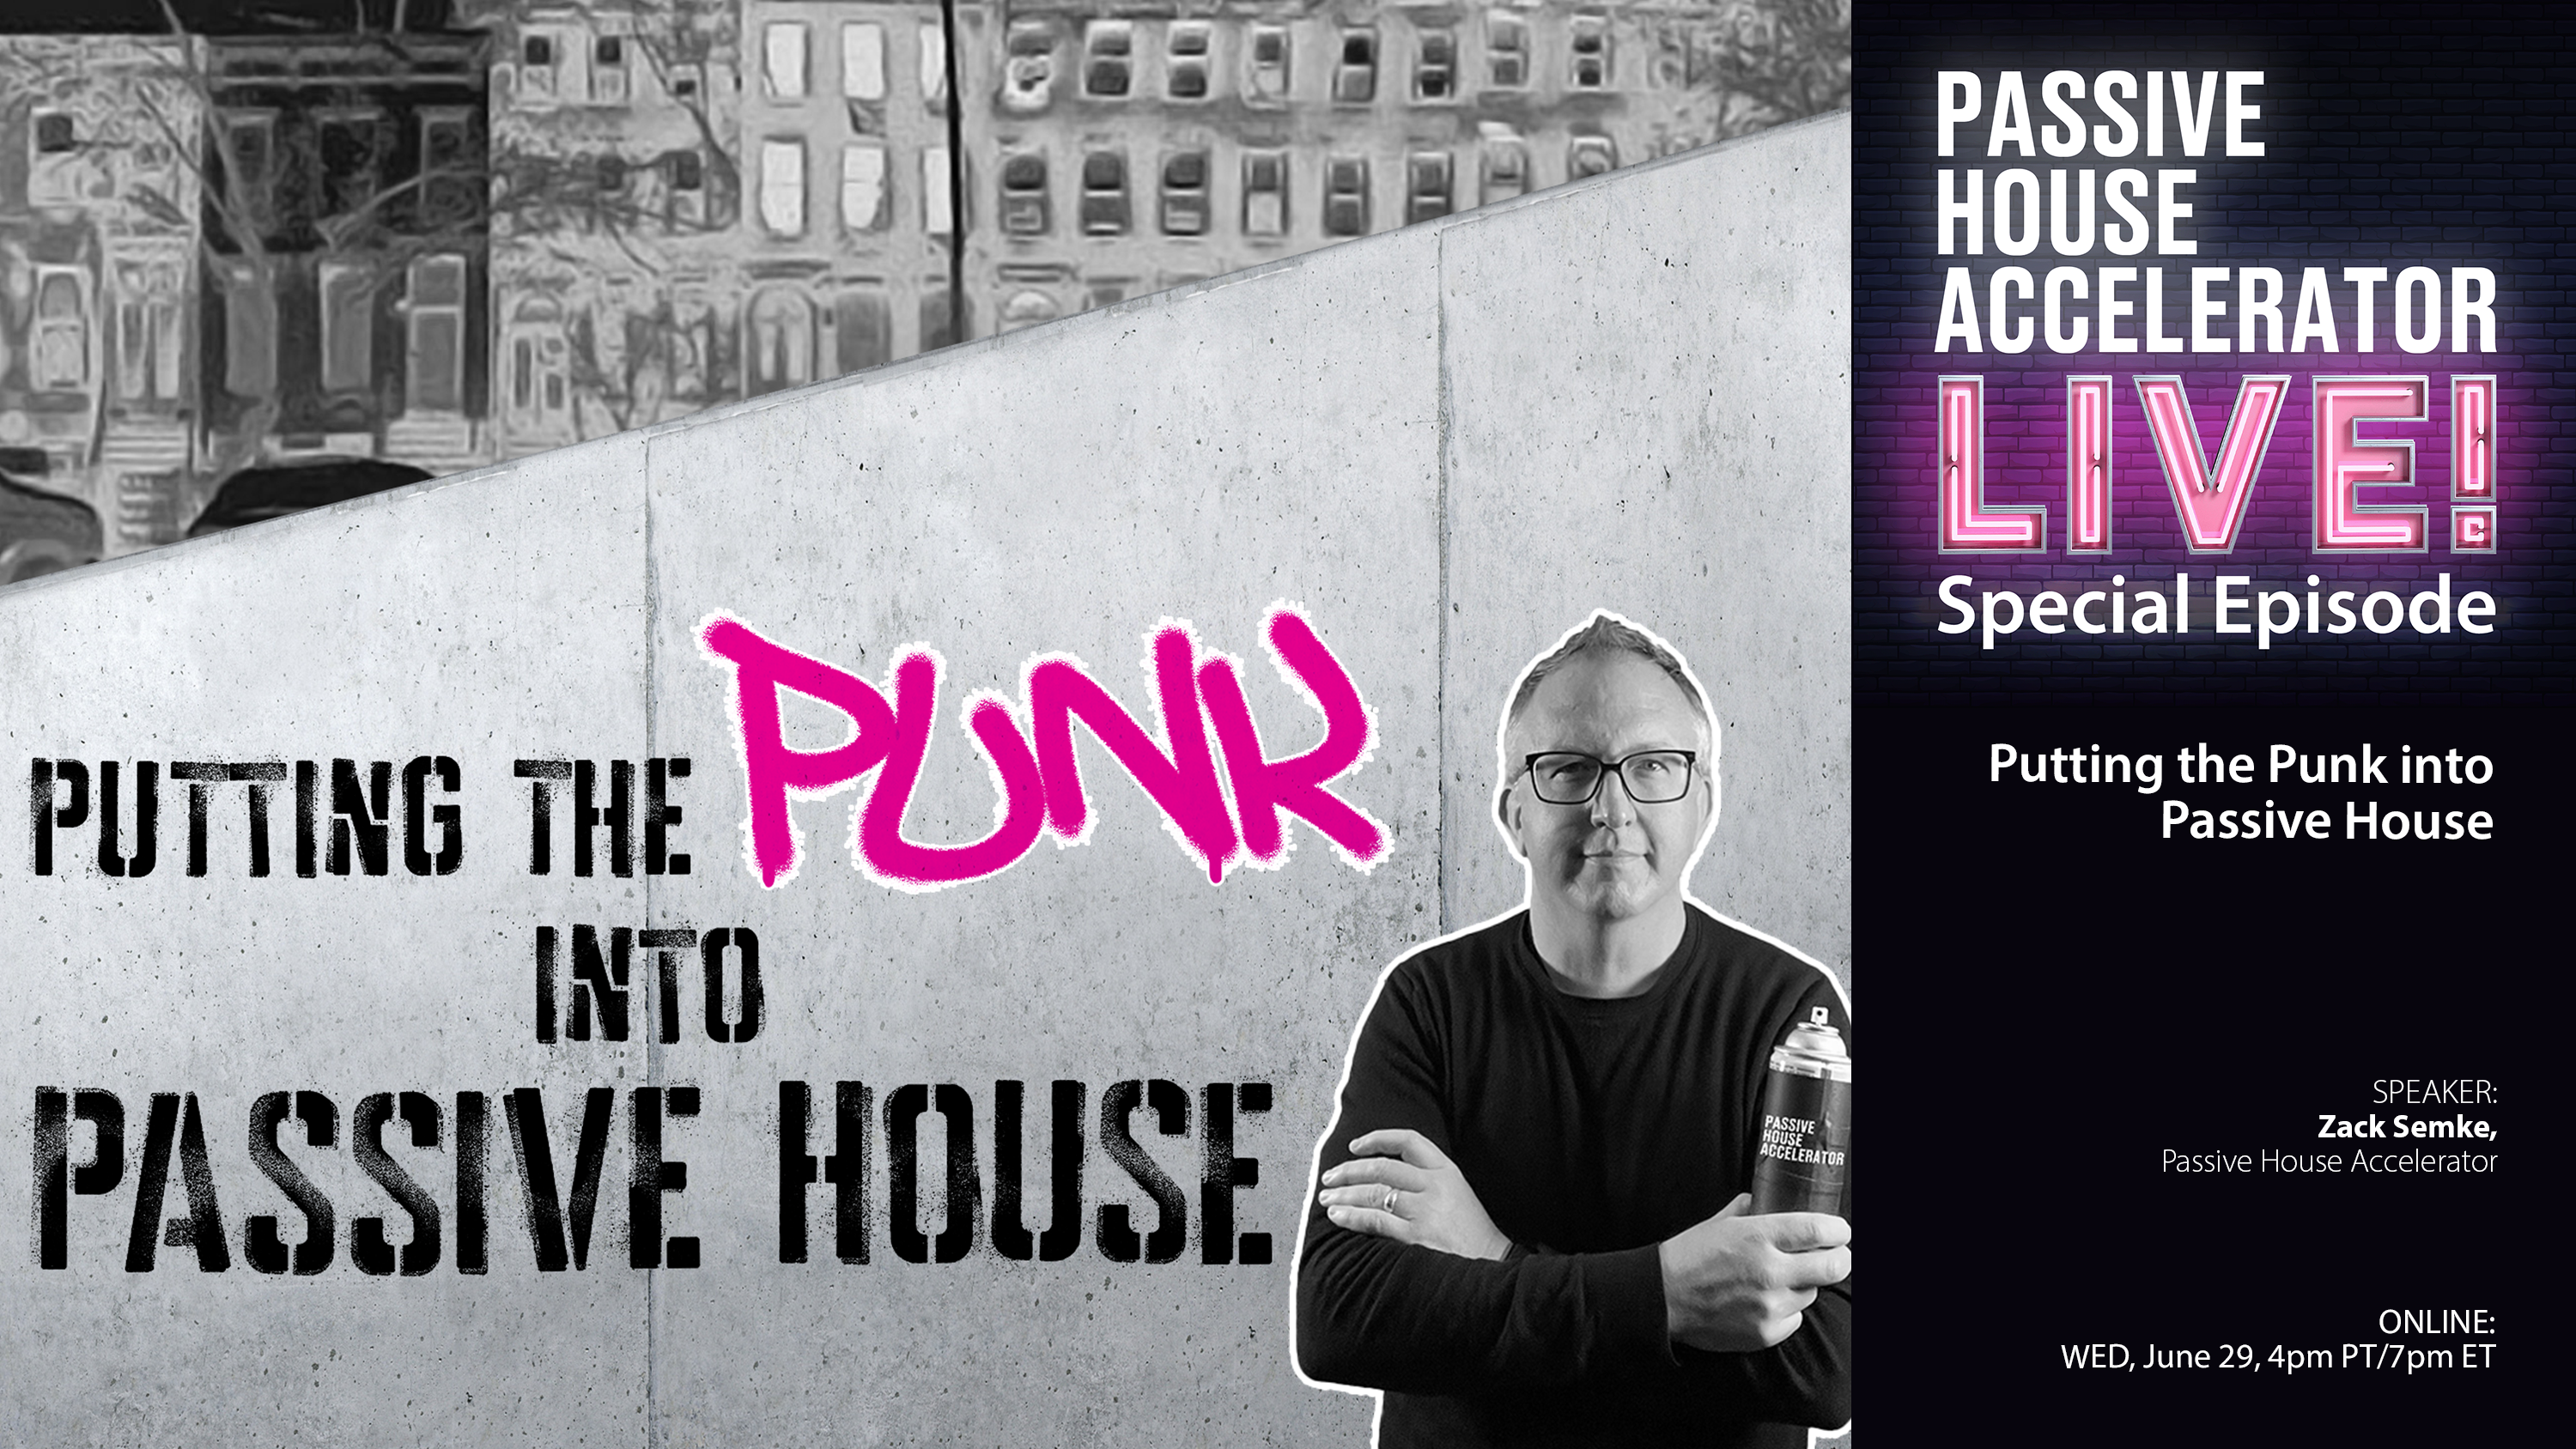 Putting the Punk into Passive House